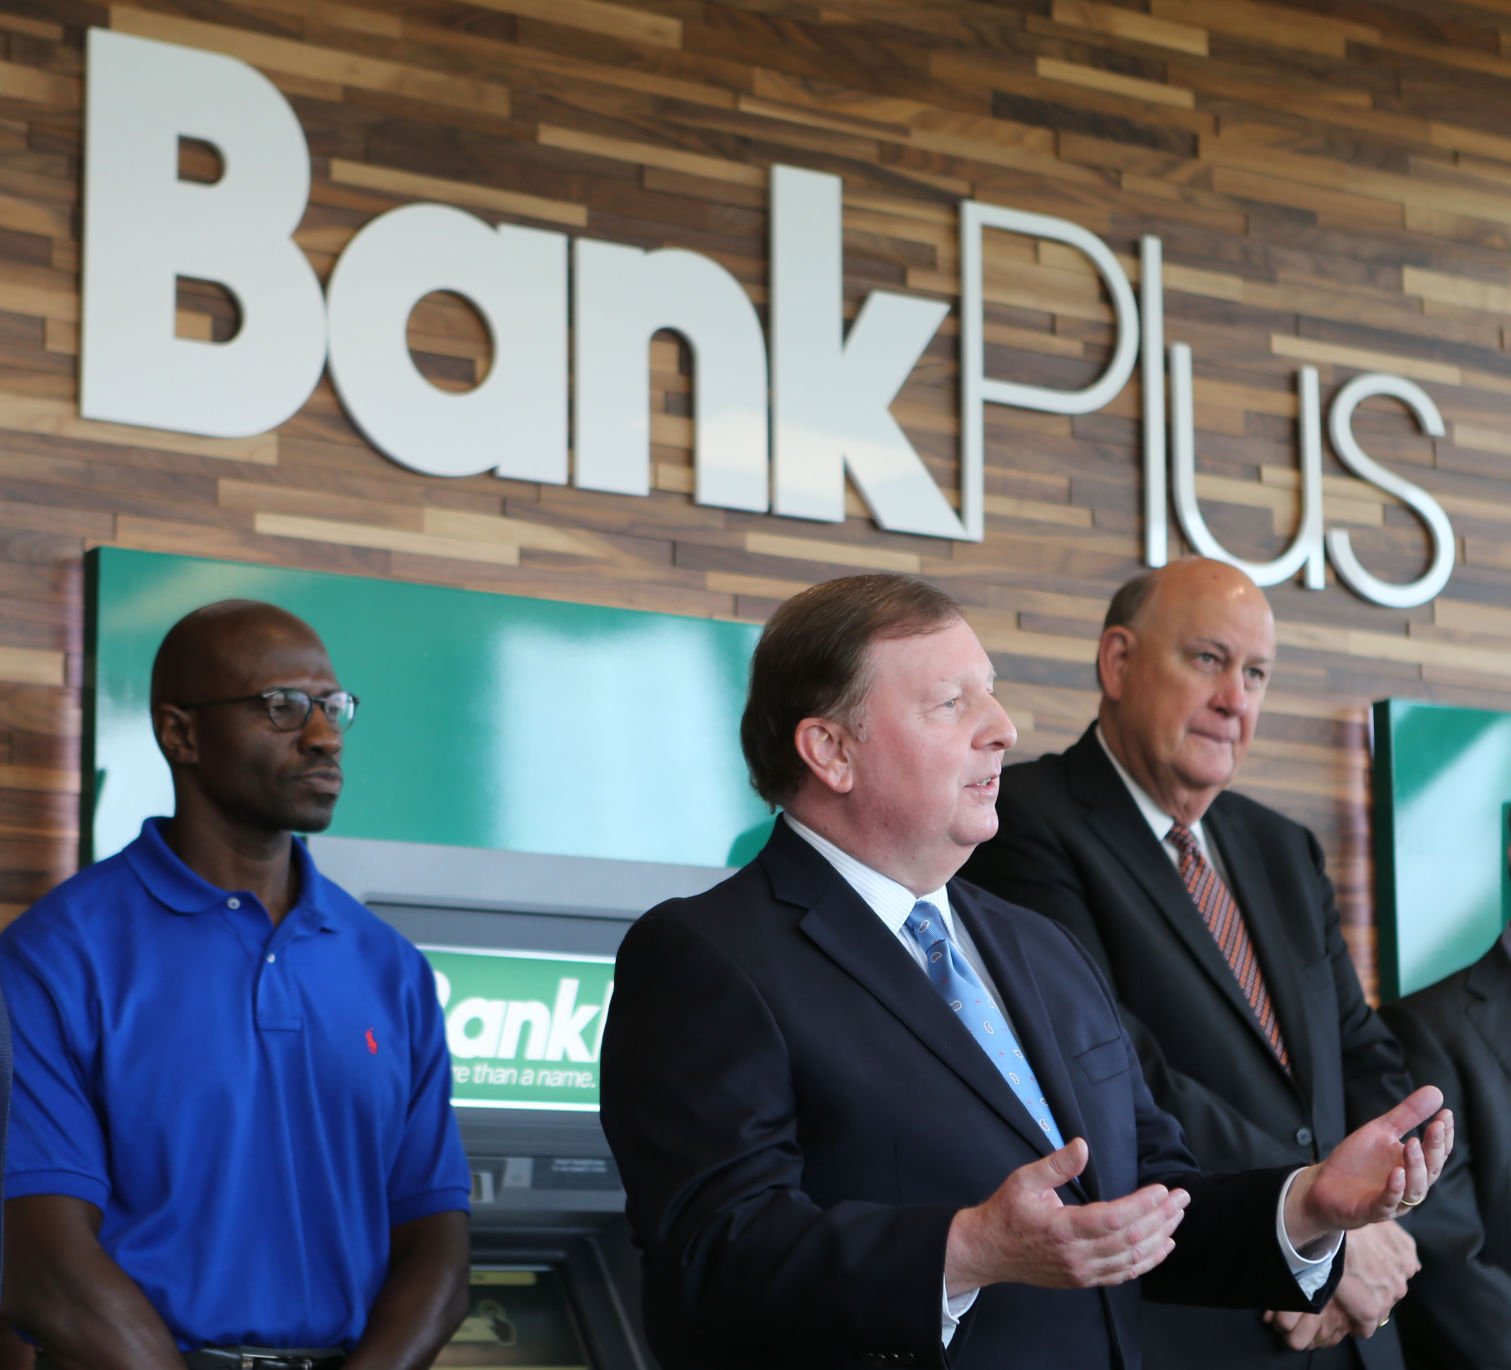 BankPlus growing quickly in Tupelo 